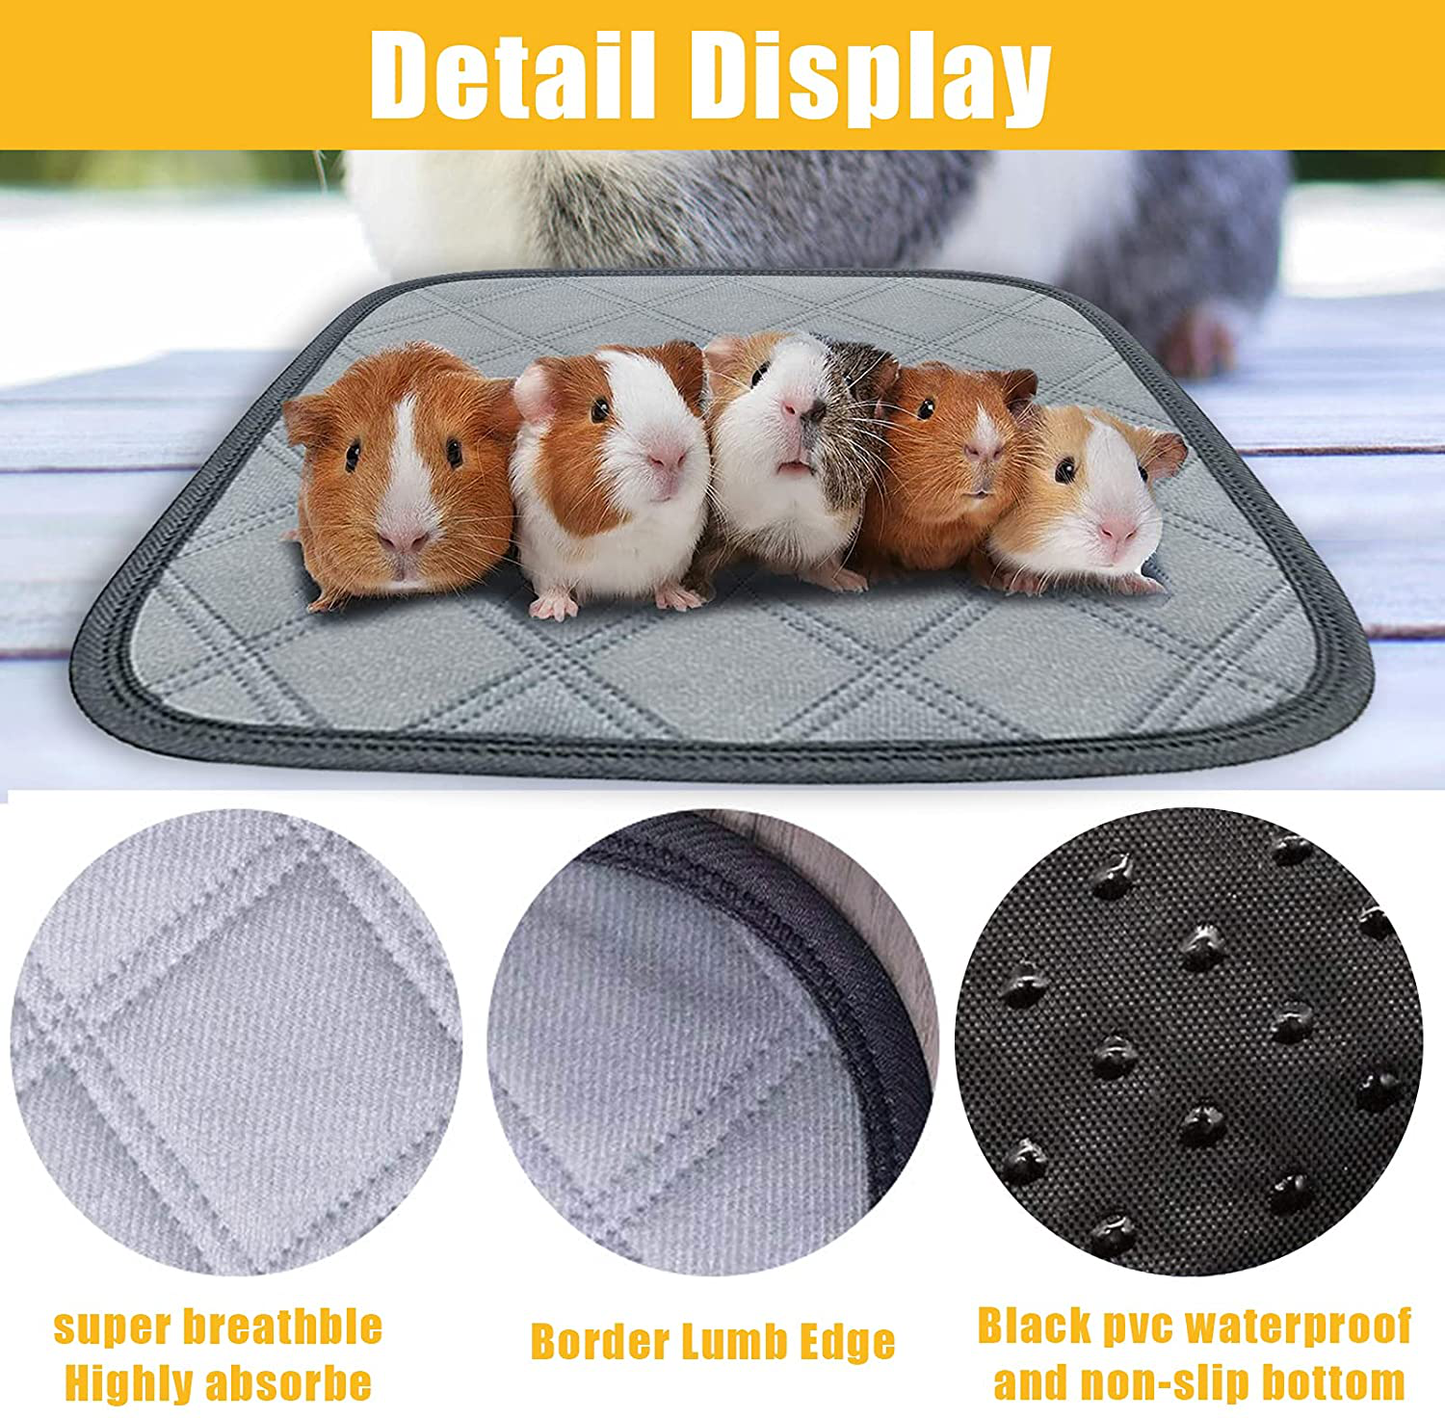 Luticessy Guinea Pig Cage Liners, Washable & Reusable Guinea Pig Pee Pads, Anti-Slip and Super Absorbent Guinea Pig Bedding, Waterproof Pet Training Pads for Small Animals